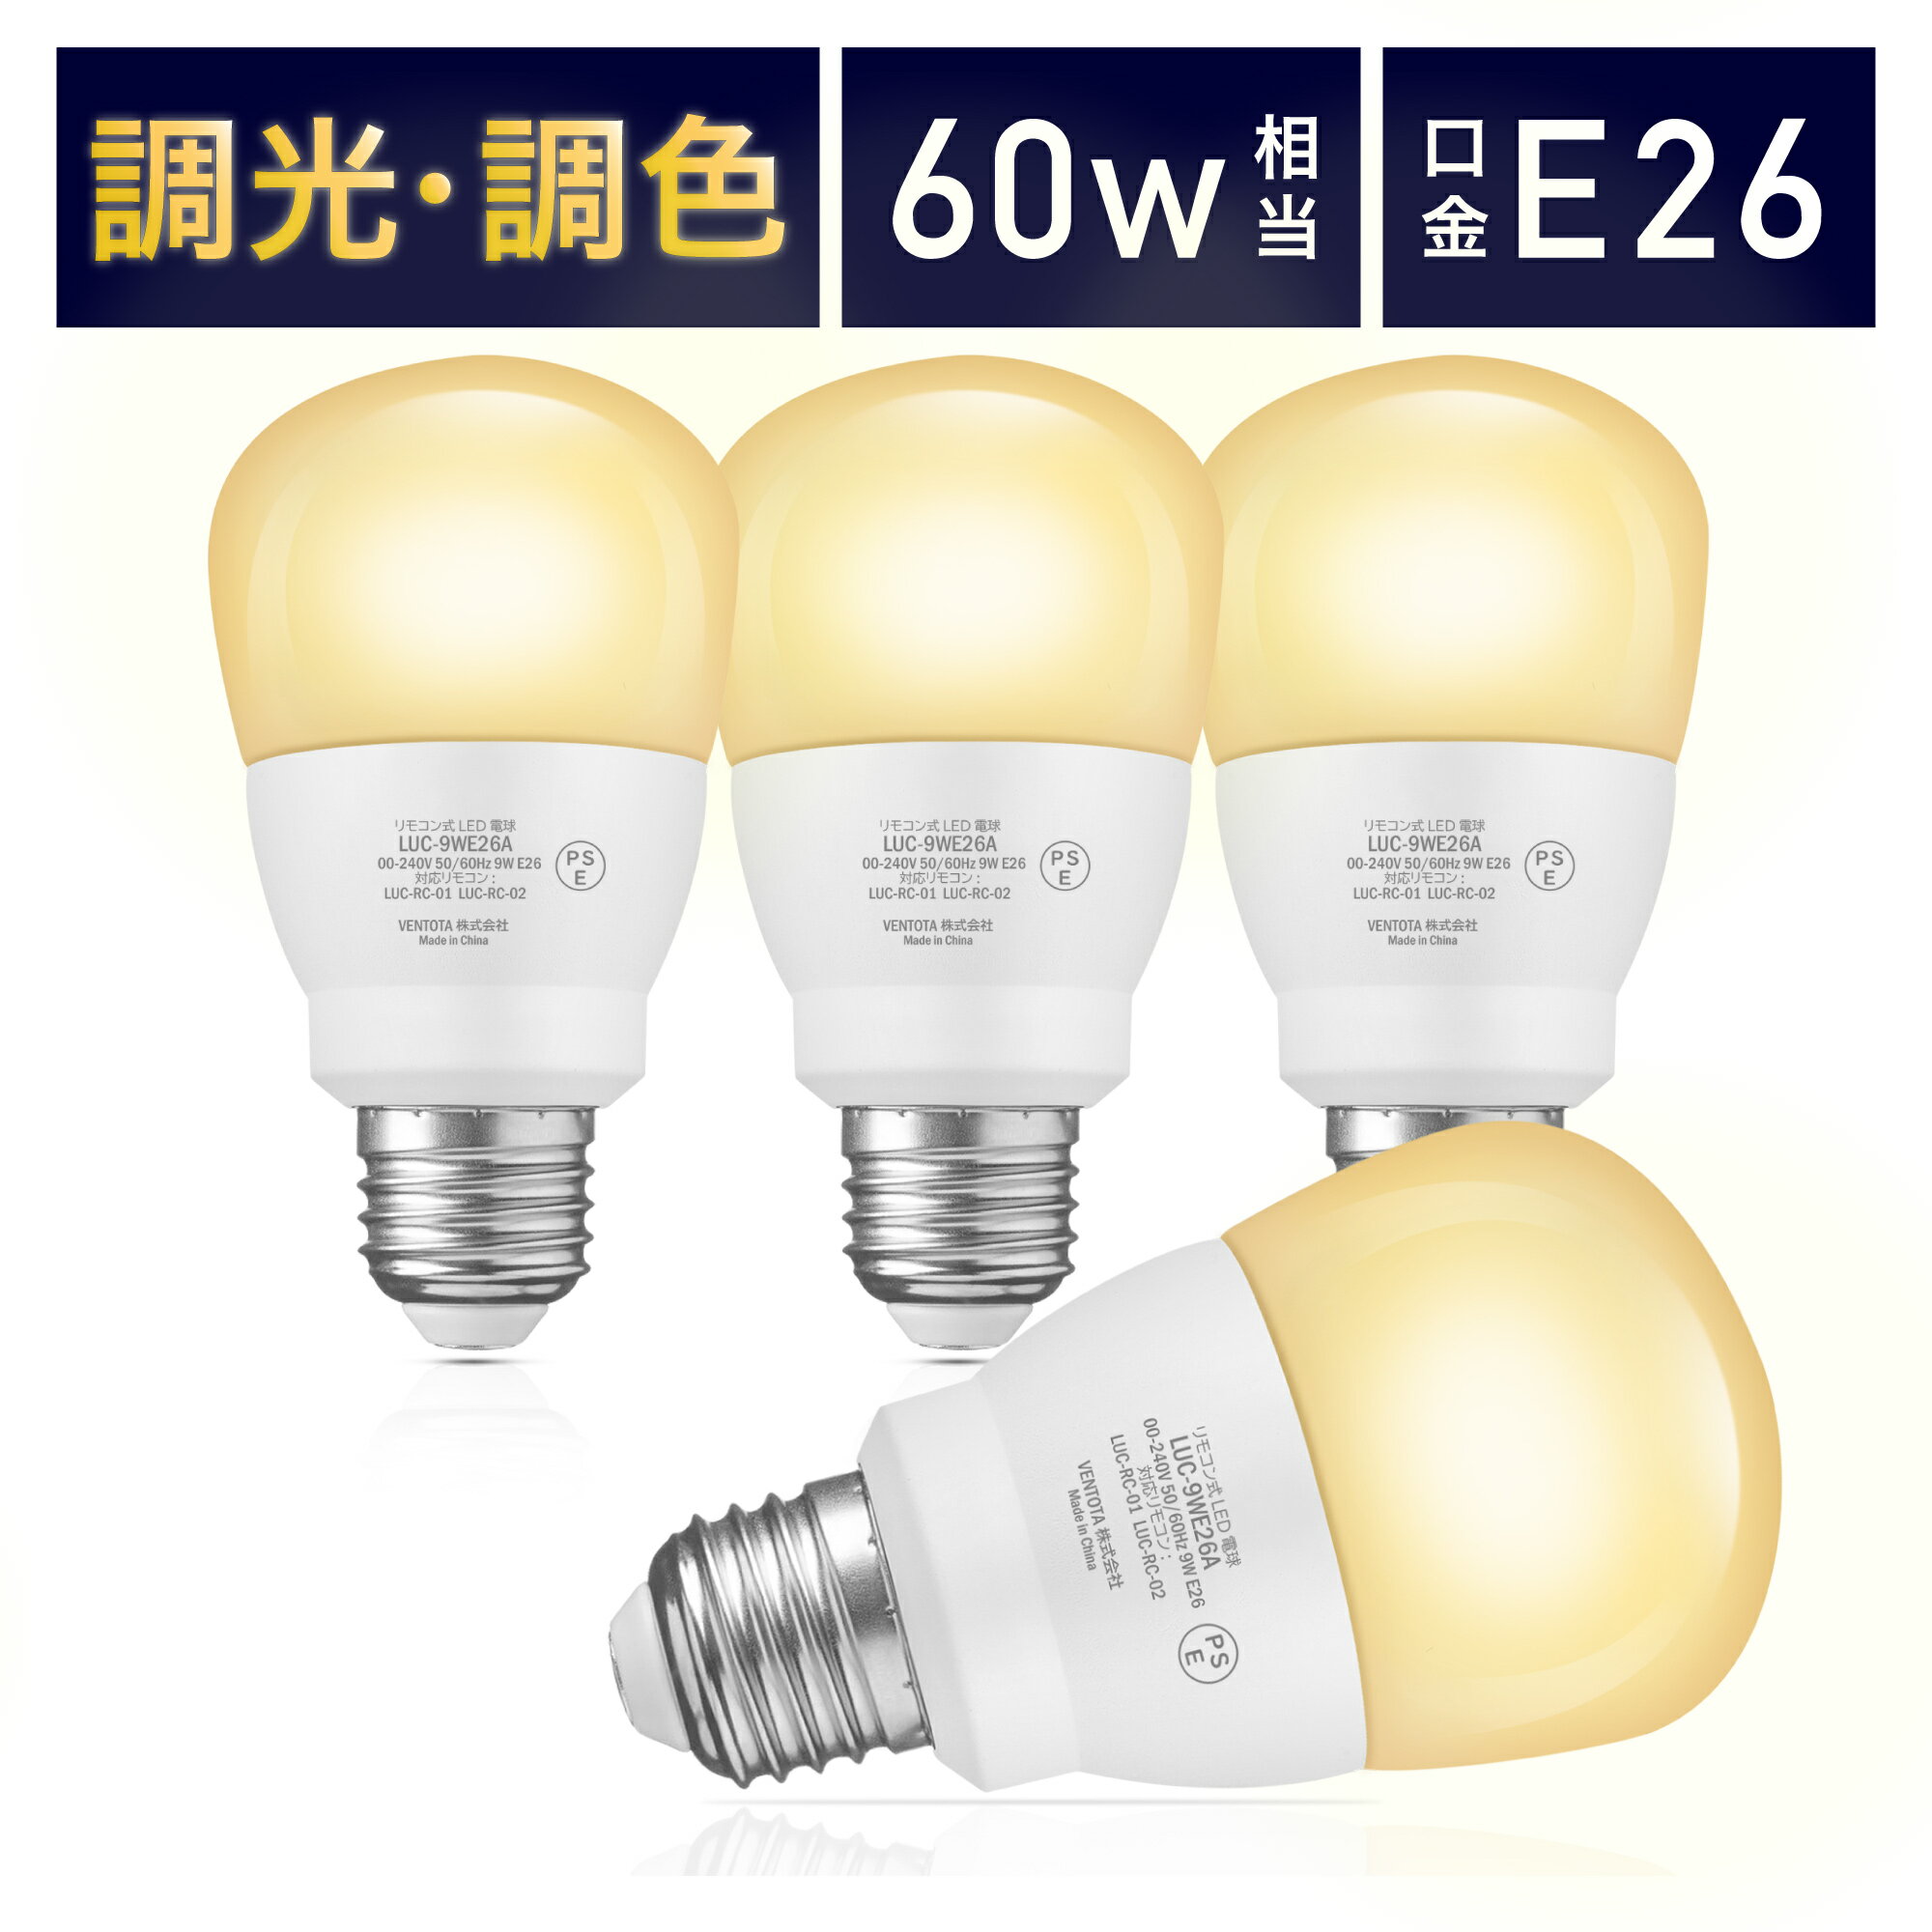 ŵ4ĥåȡLEDŵ ⥳ 60w E26 ĴĴ ľ67mm 4ͥ   ŵ忧 900lm ꡼ ޡ   ۸ ⵱ 鿧 ʥ  led 뤤 Lucimo 륷 LUC-9WE26A ⥳